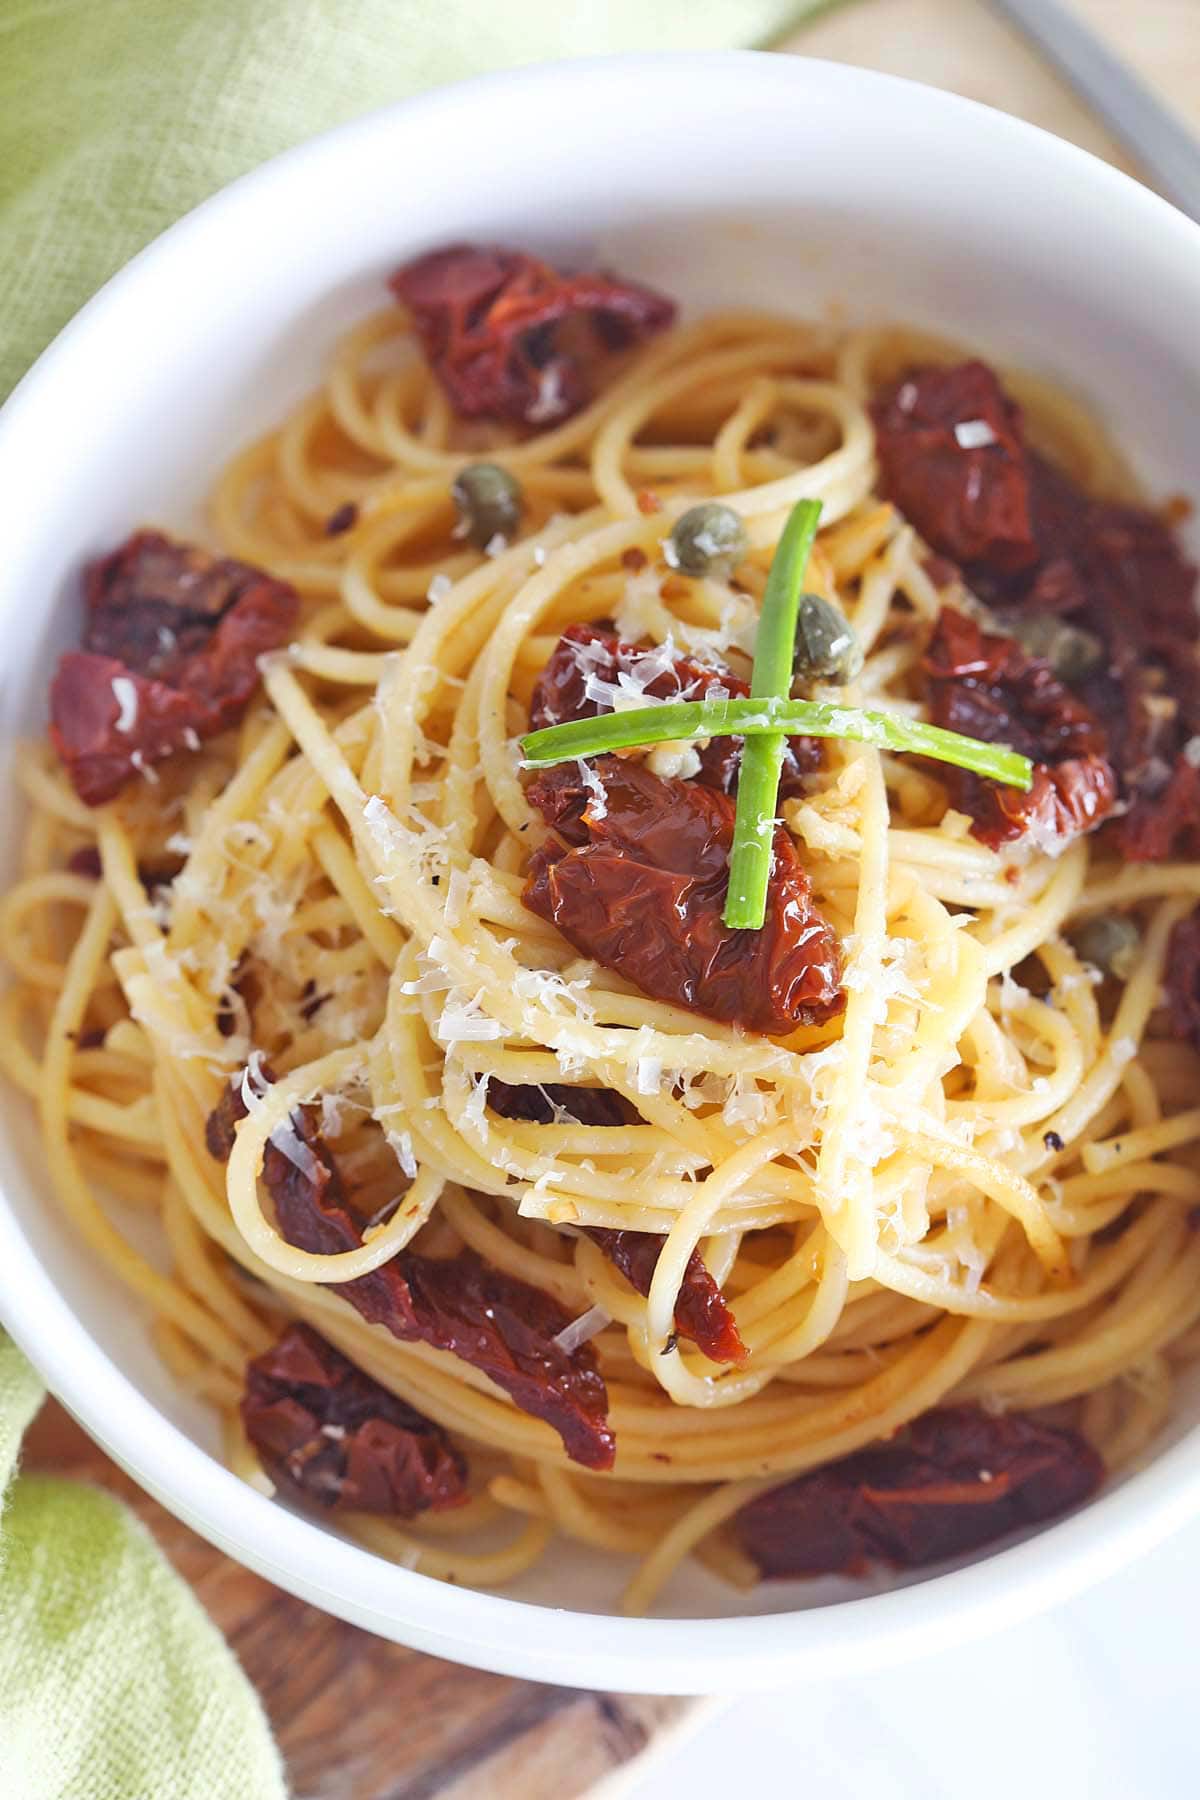 Sun dried tomato pasta recipe with spaghetti, sun dried tomatoes and shaved parmesan cheese.